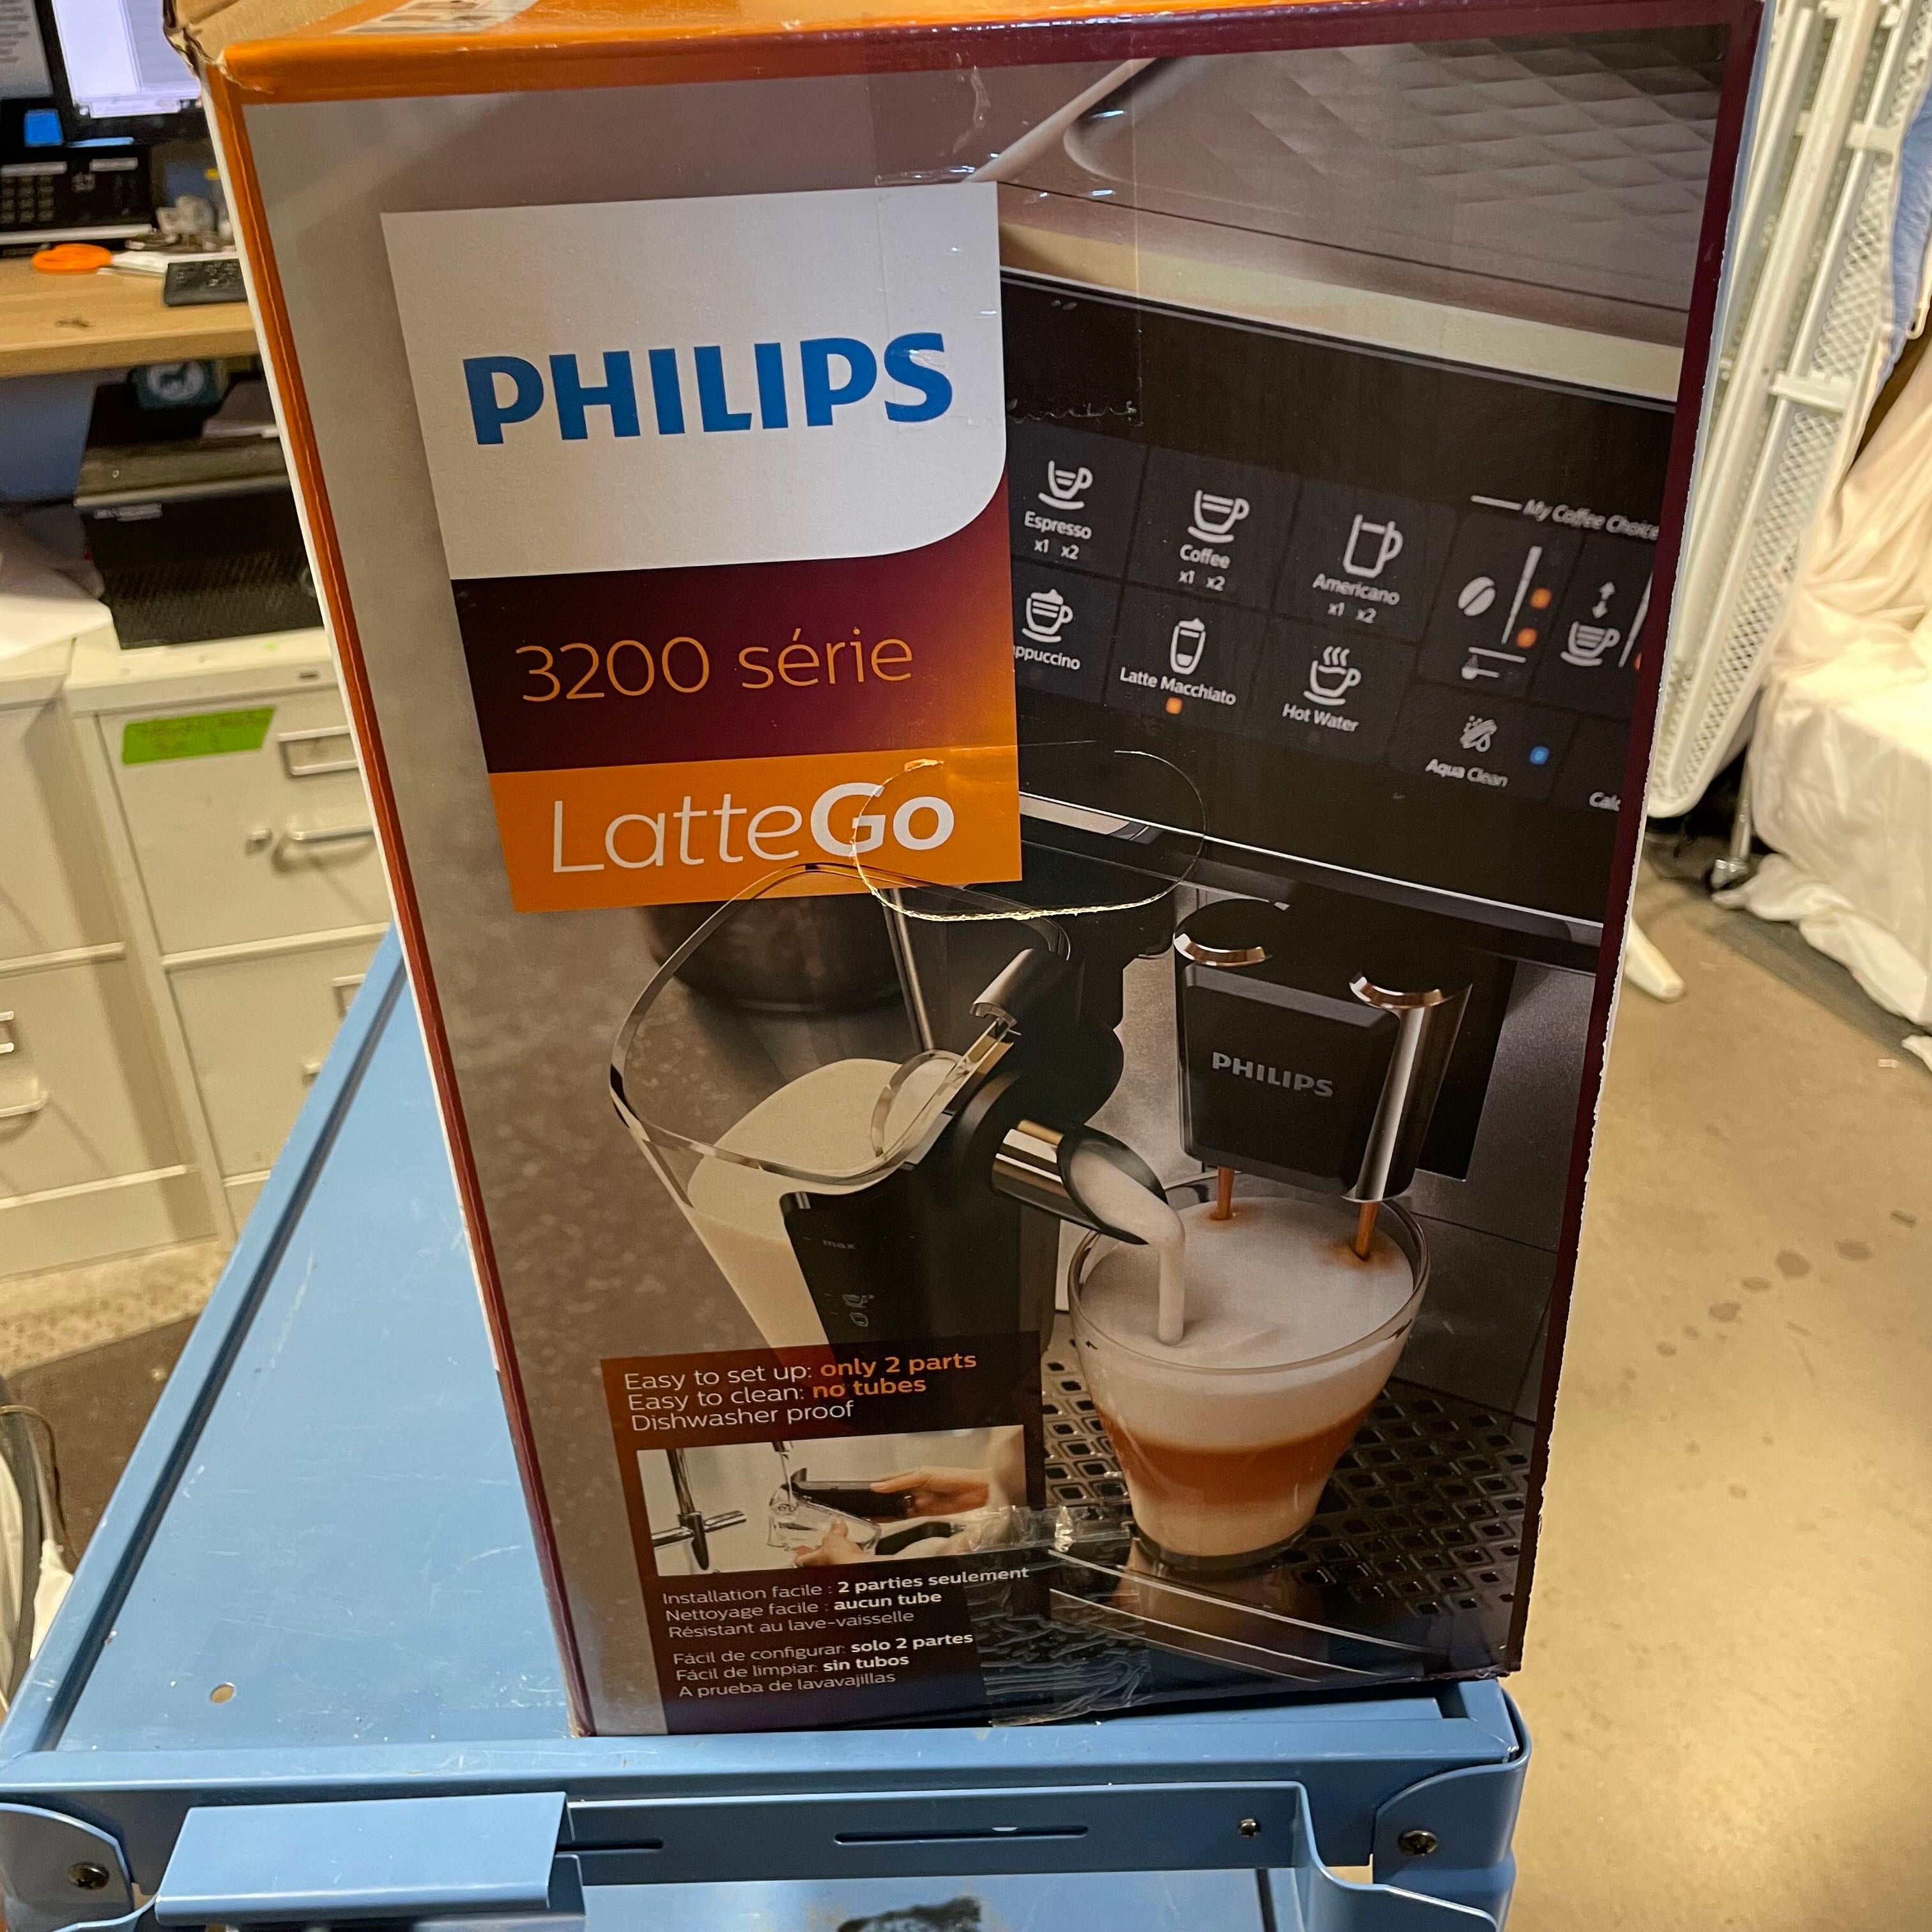 Philips 3200 Series LatteGo with Milk Frother Fully Automatic Espresso Machine